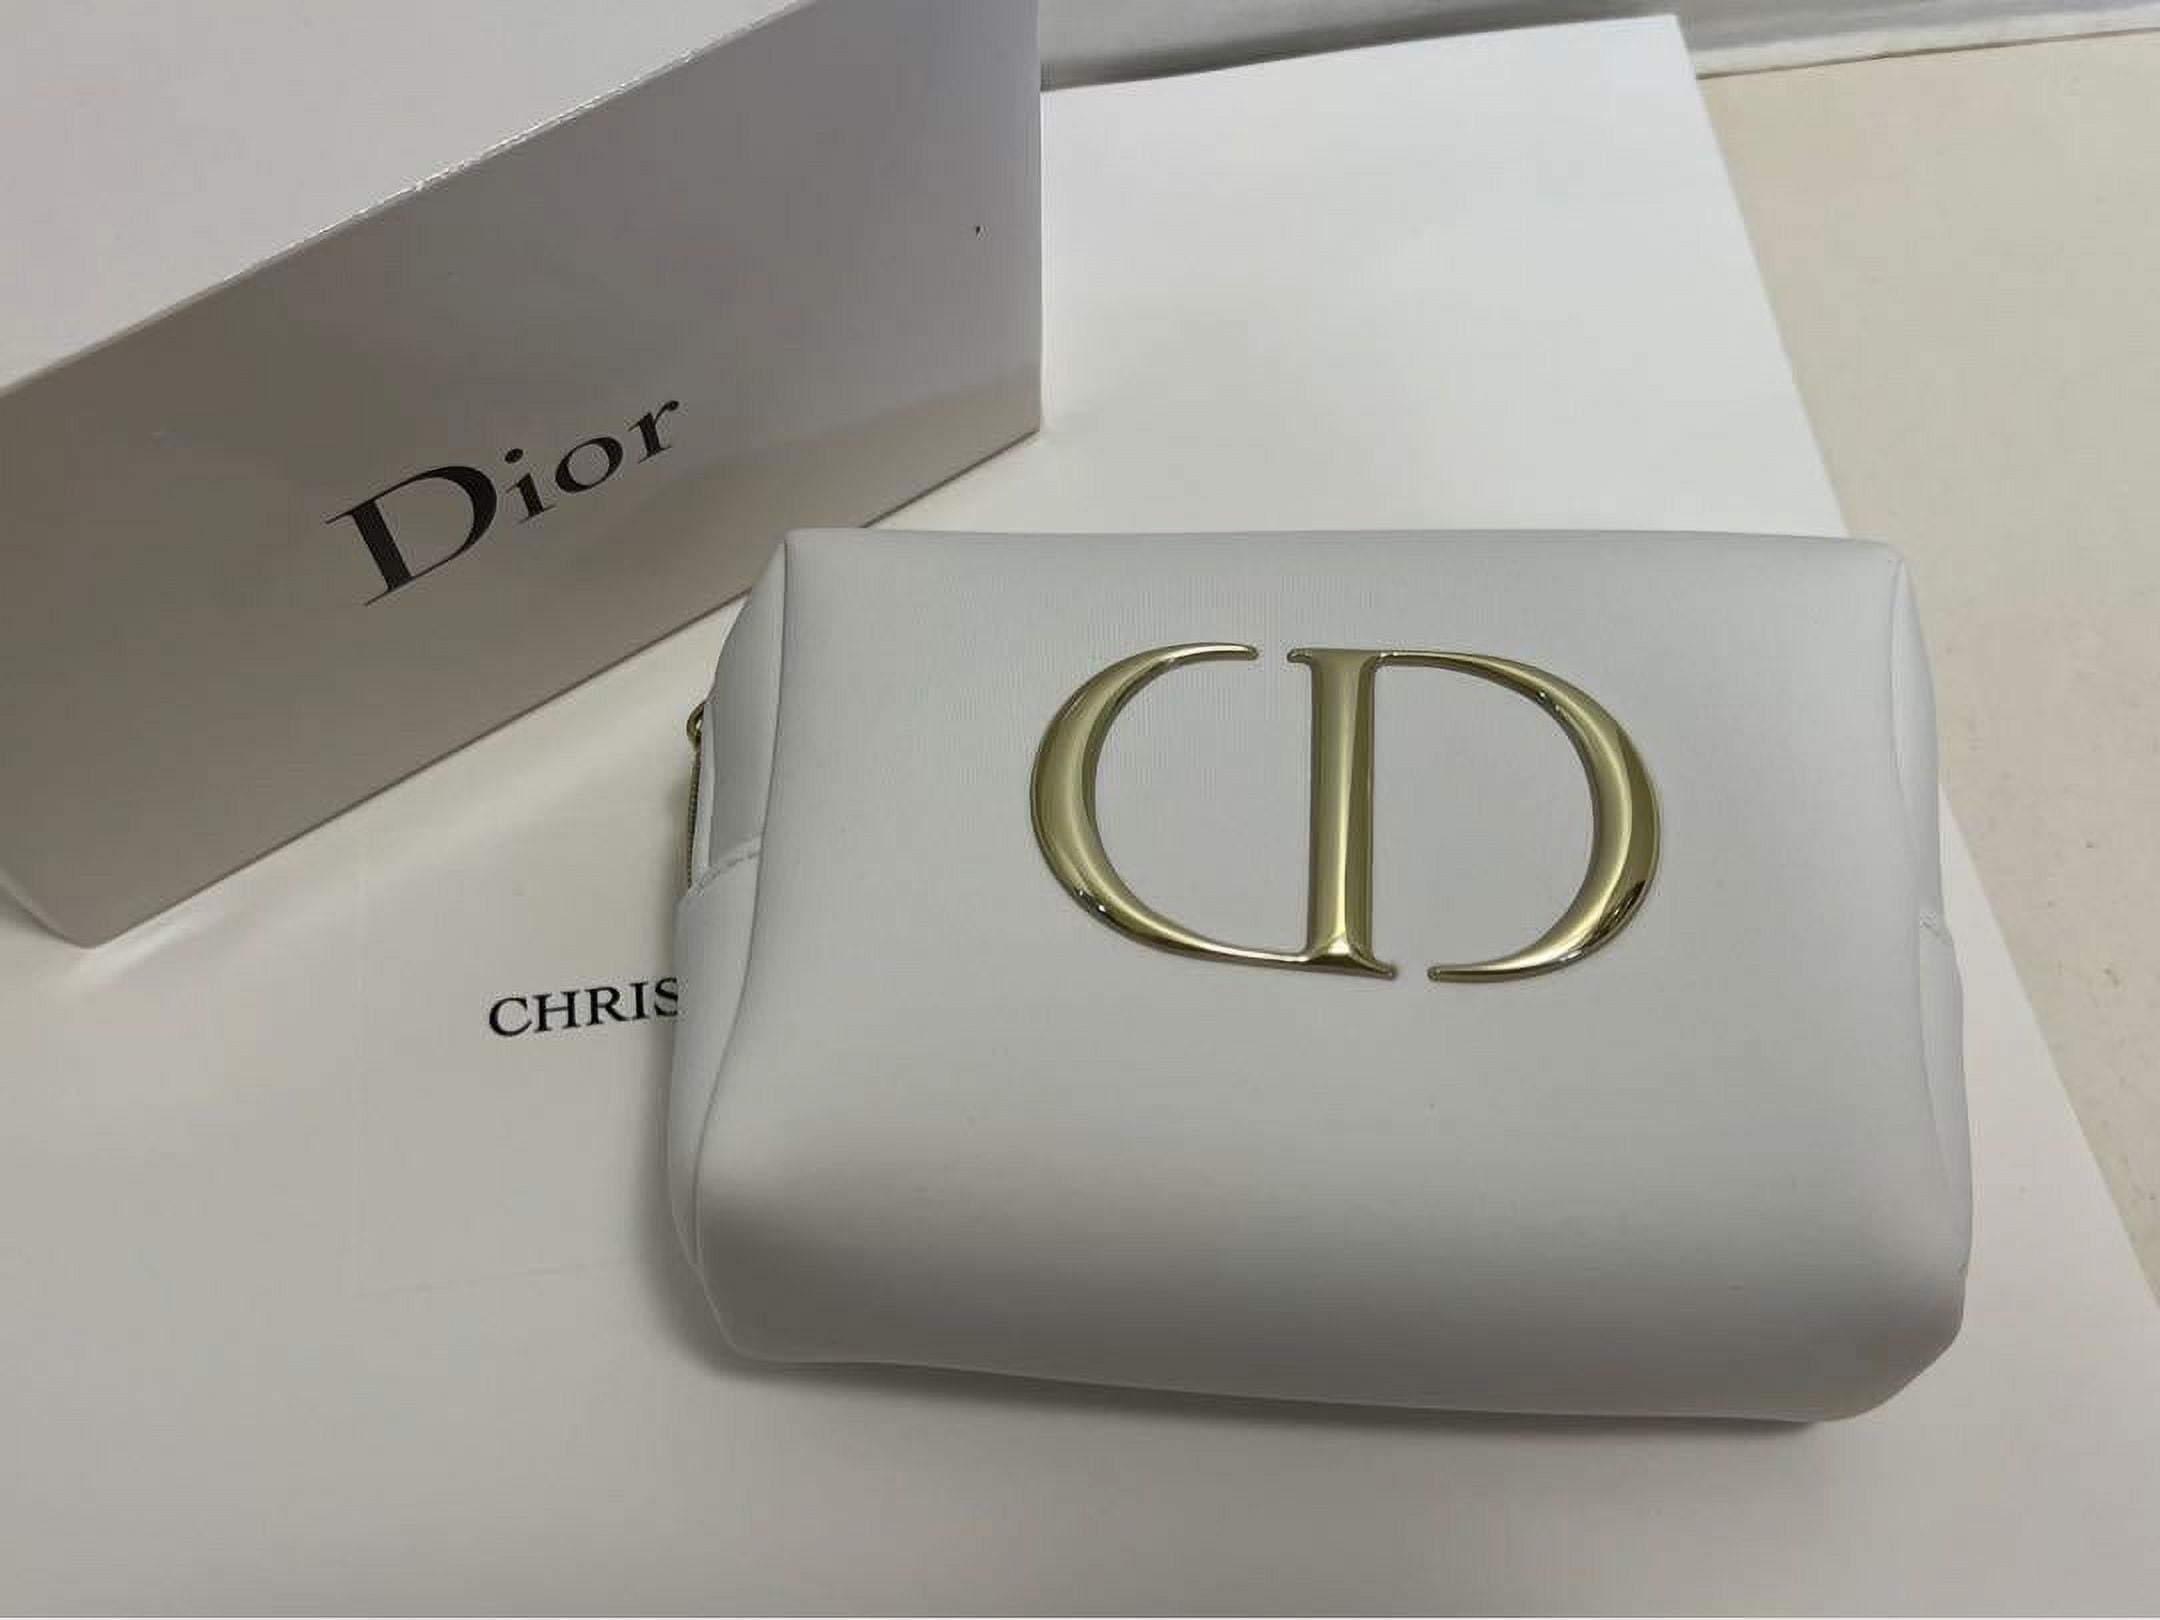 DIOR COSMETIC/MAKEUP BAG POUCH CLUTCH PINK Plus Two Deluxe Samples In The  Bag | eBay